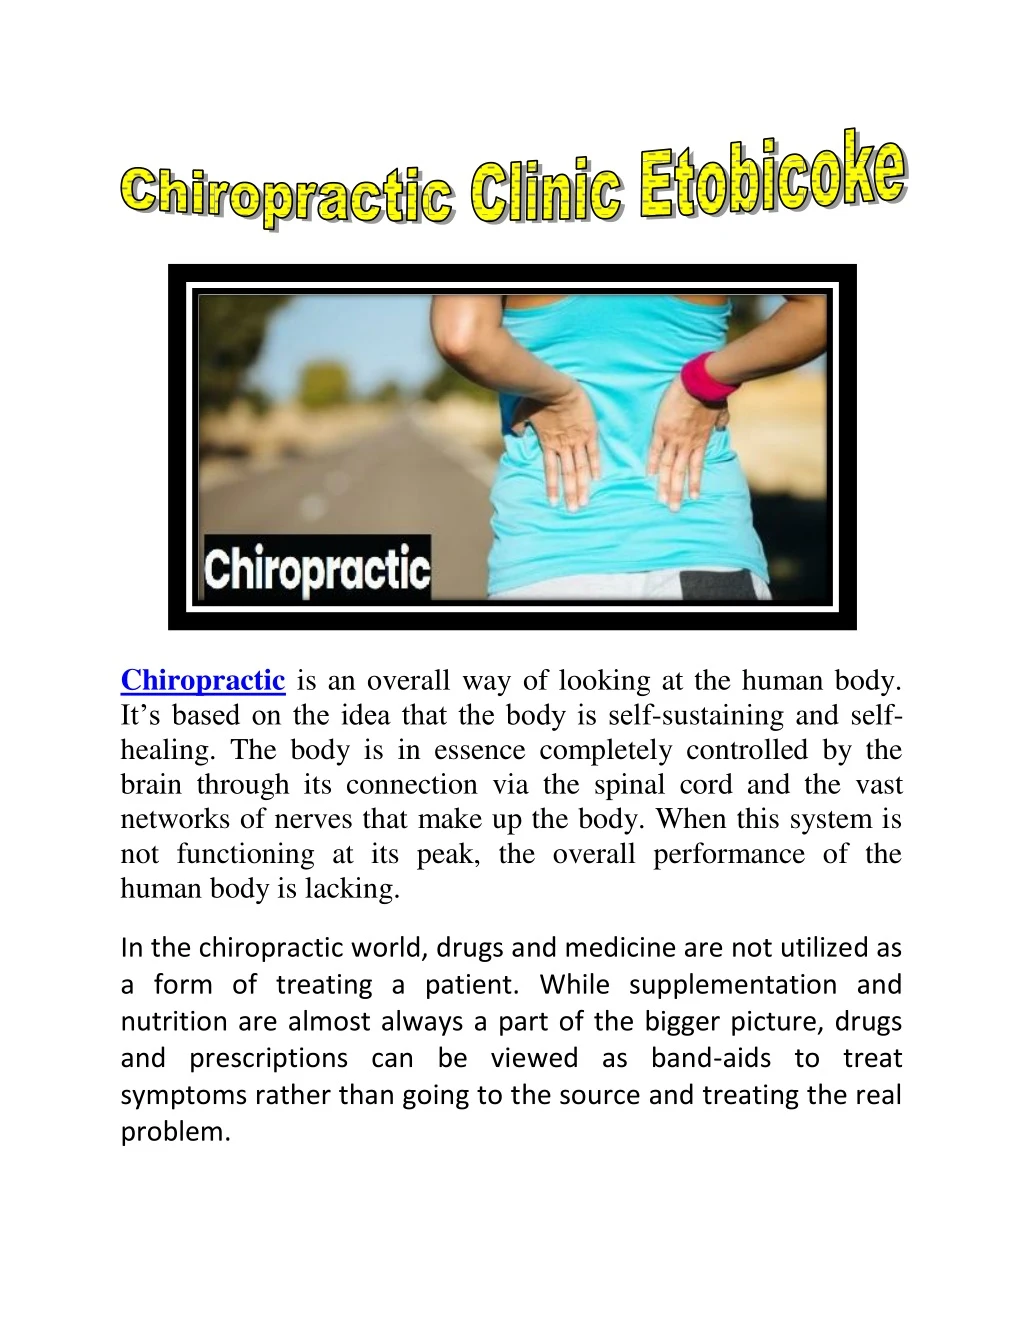 chiropractic is an overall way of looking